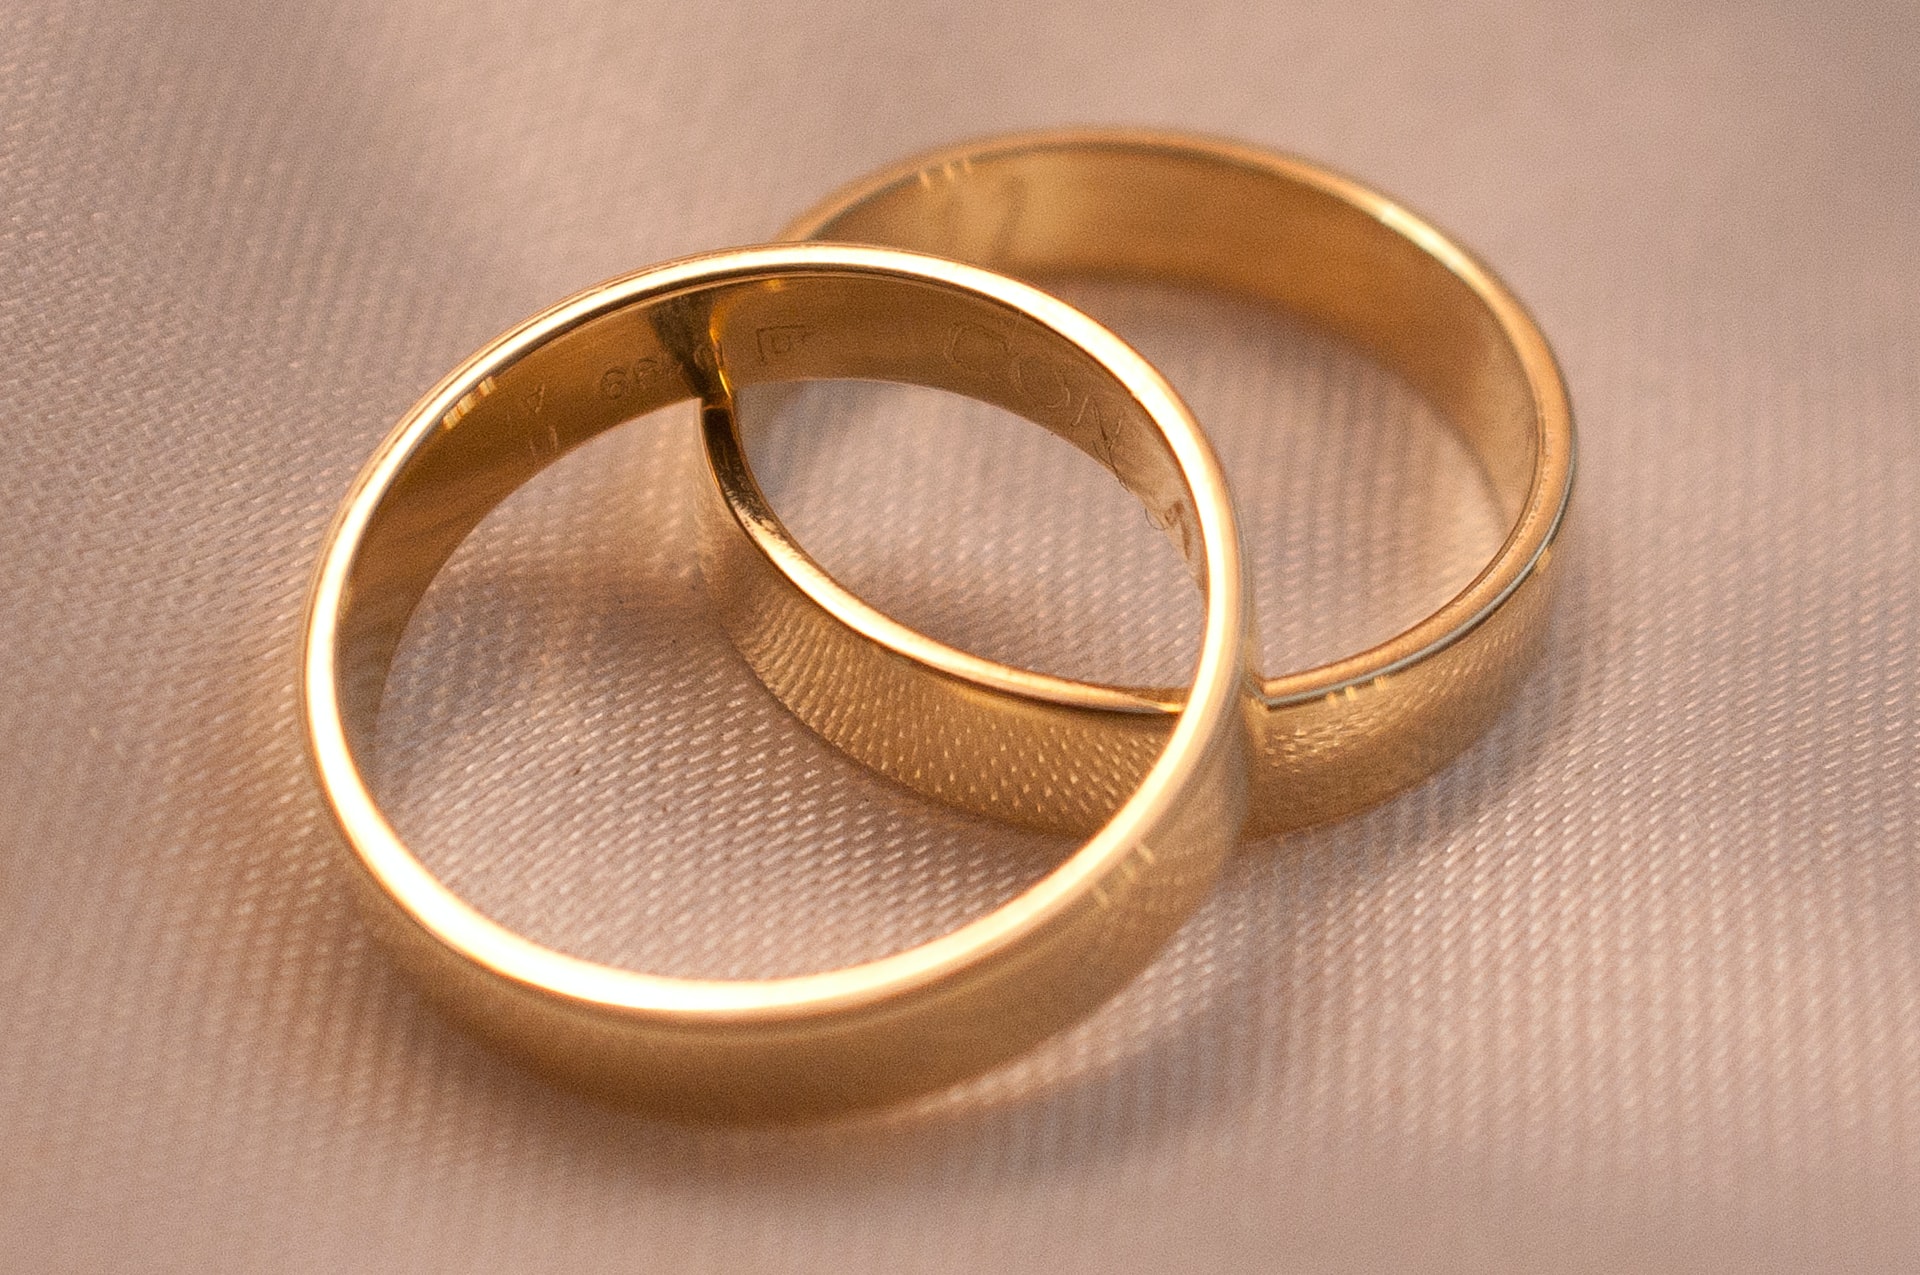 Wedding Rings: How To Tell The Difference Between Casting & Handmade